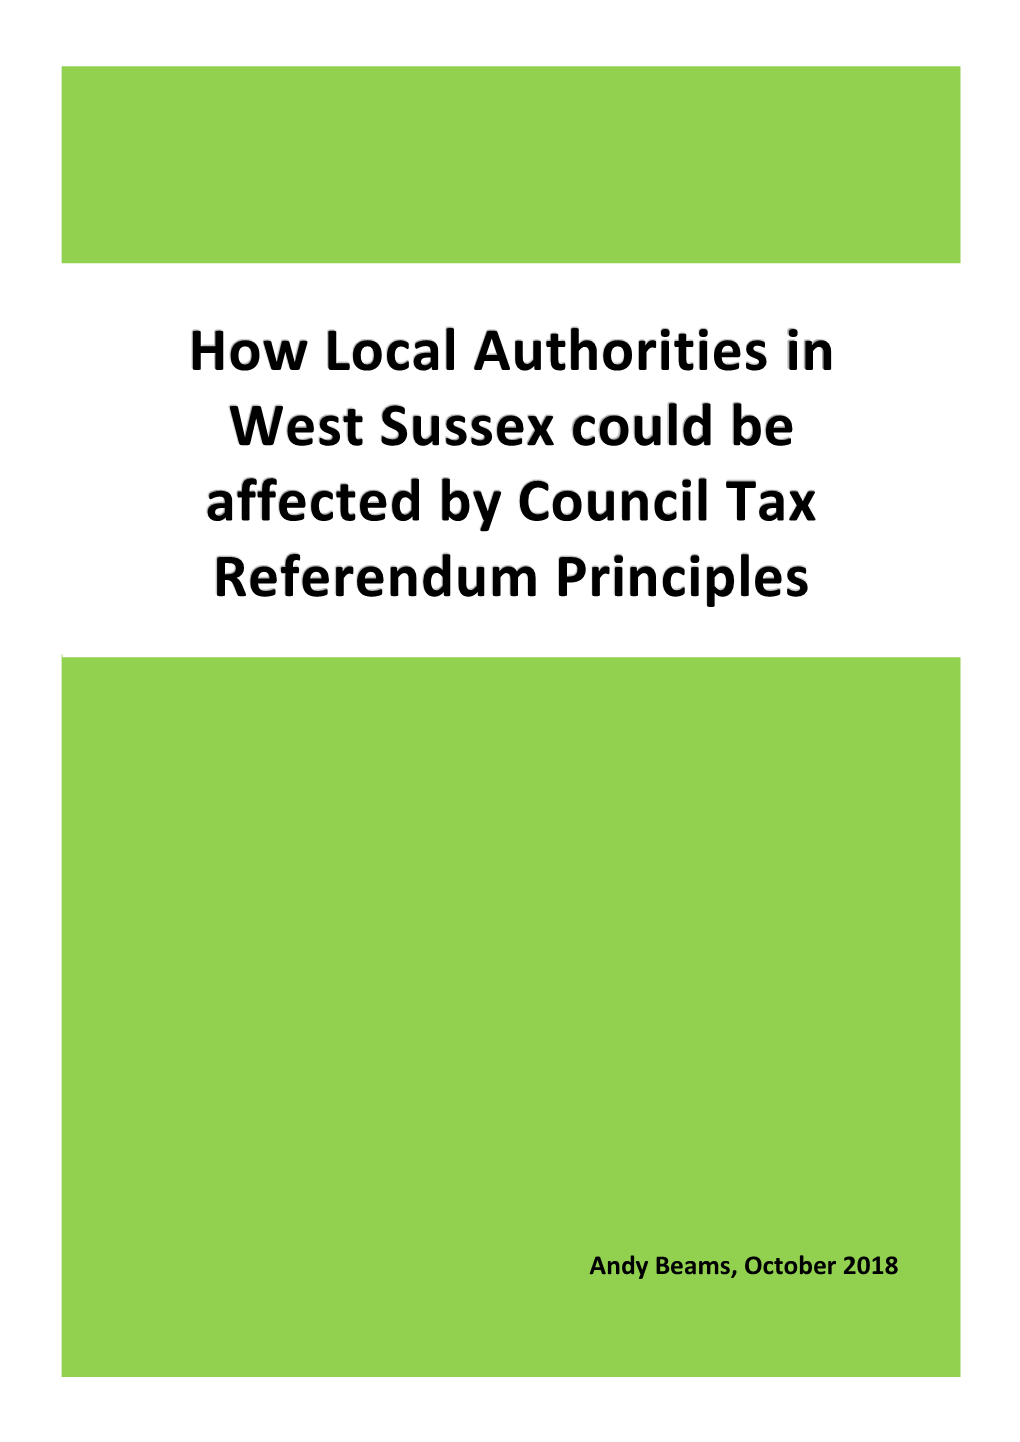 How Local Authorities in West Sussex Could Be Affected by Council Tax Referendum Principles